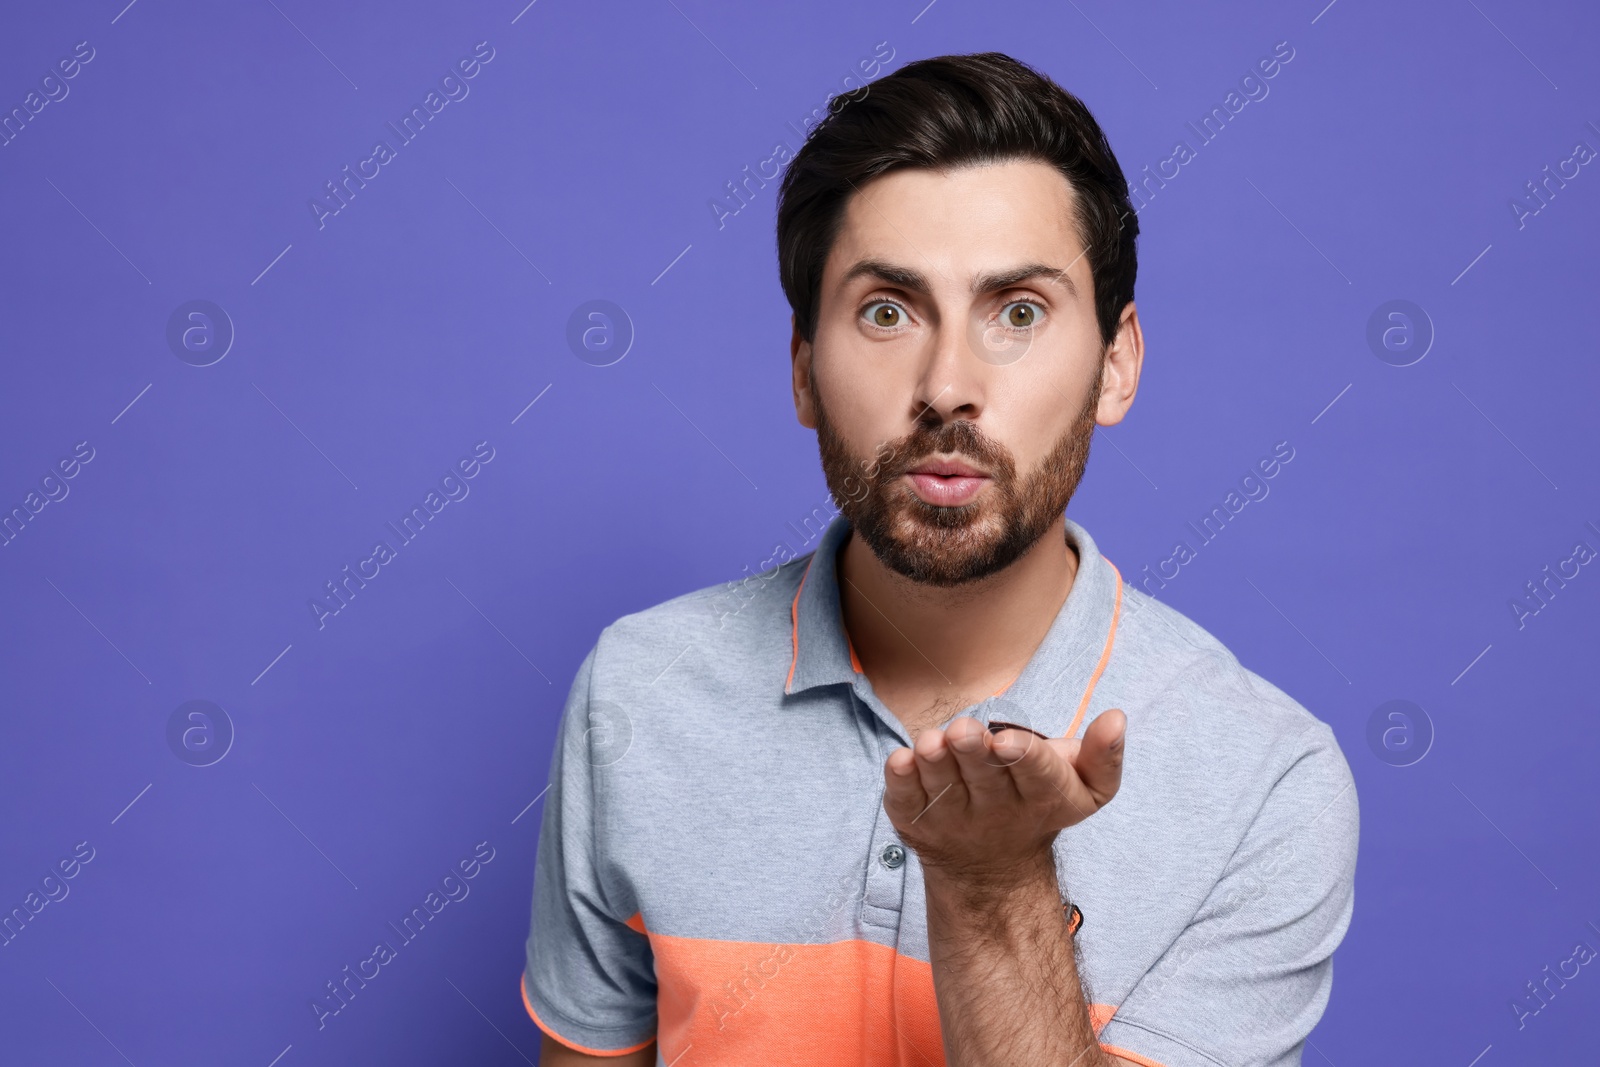 Photo of Handsome man blowing kiss on violet background. Space for text